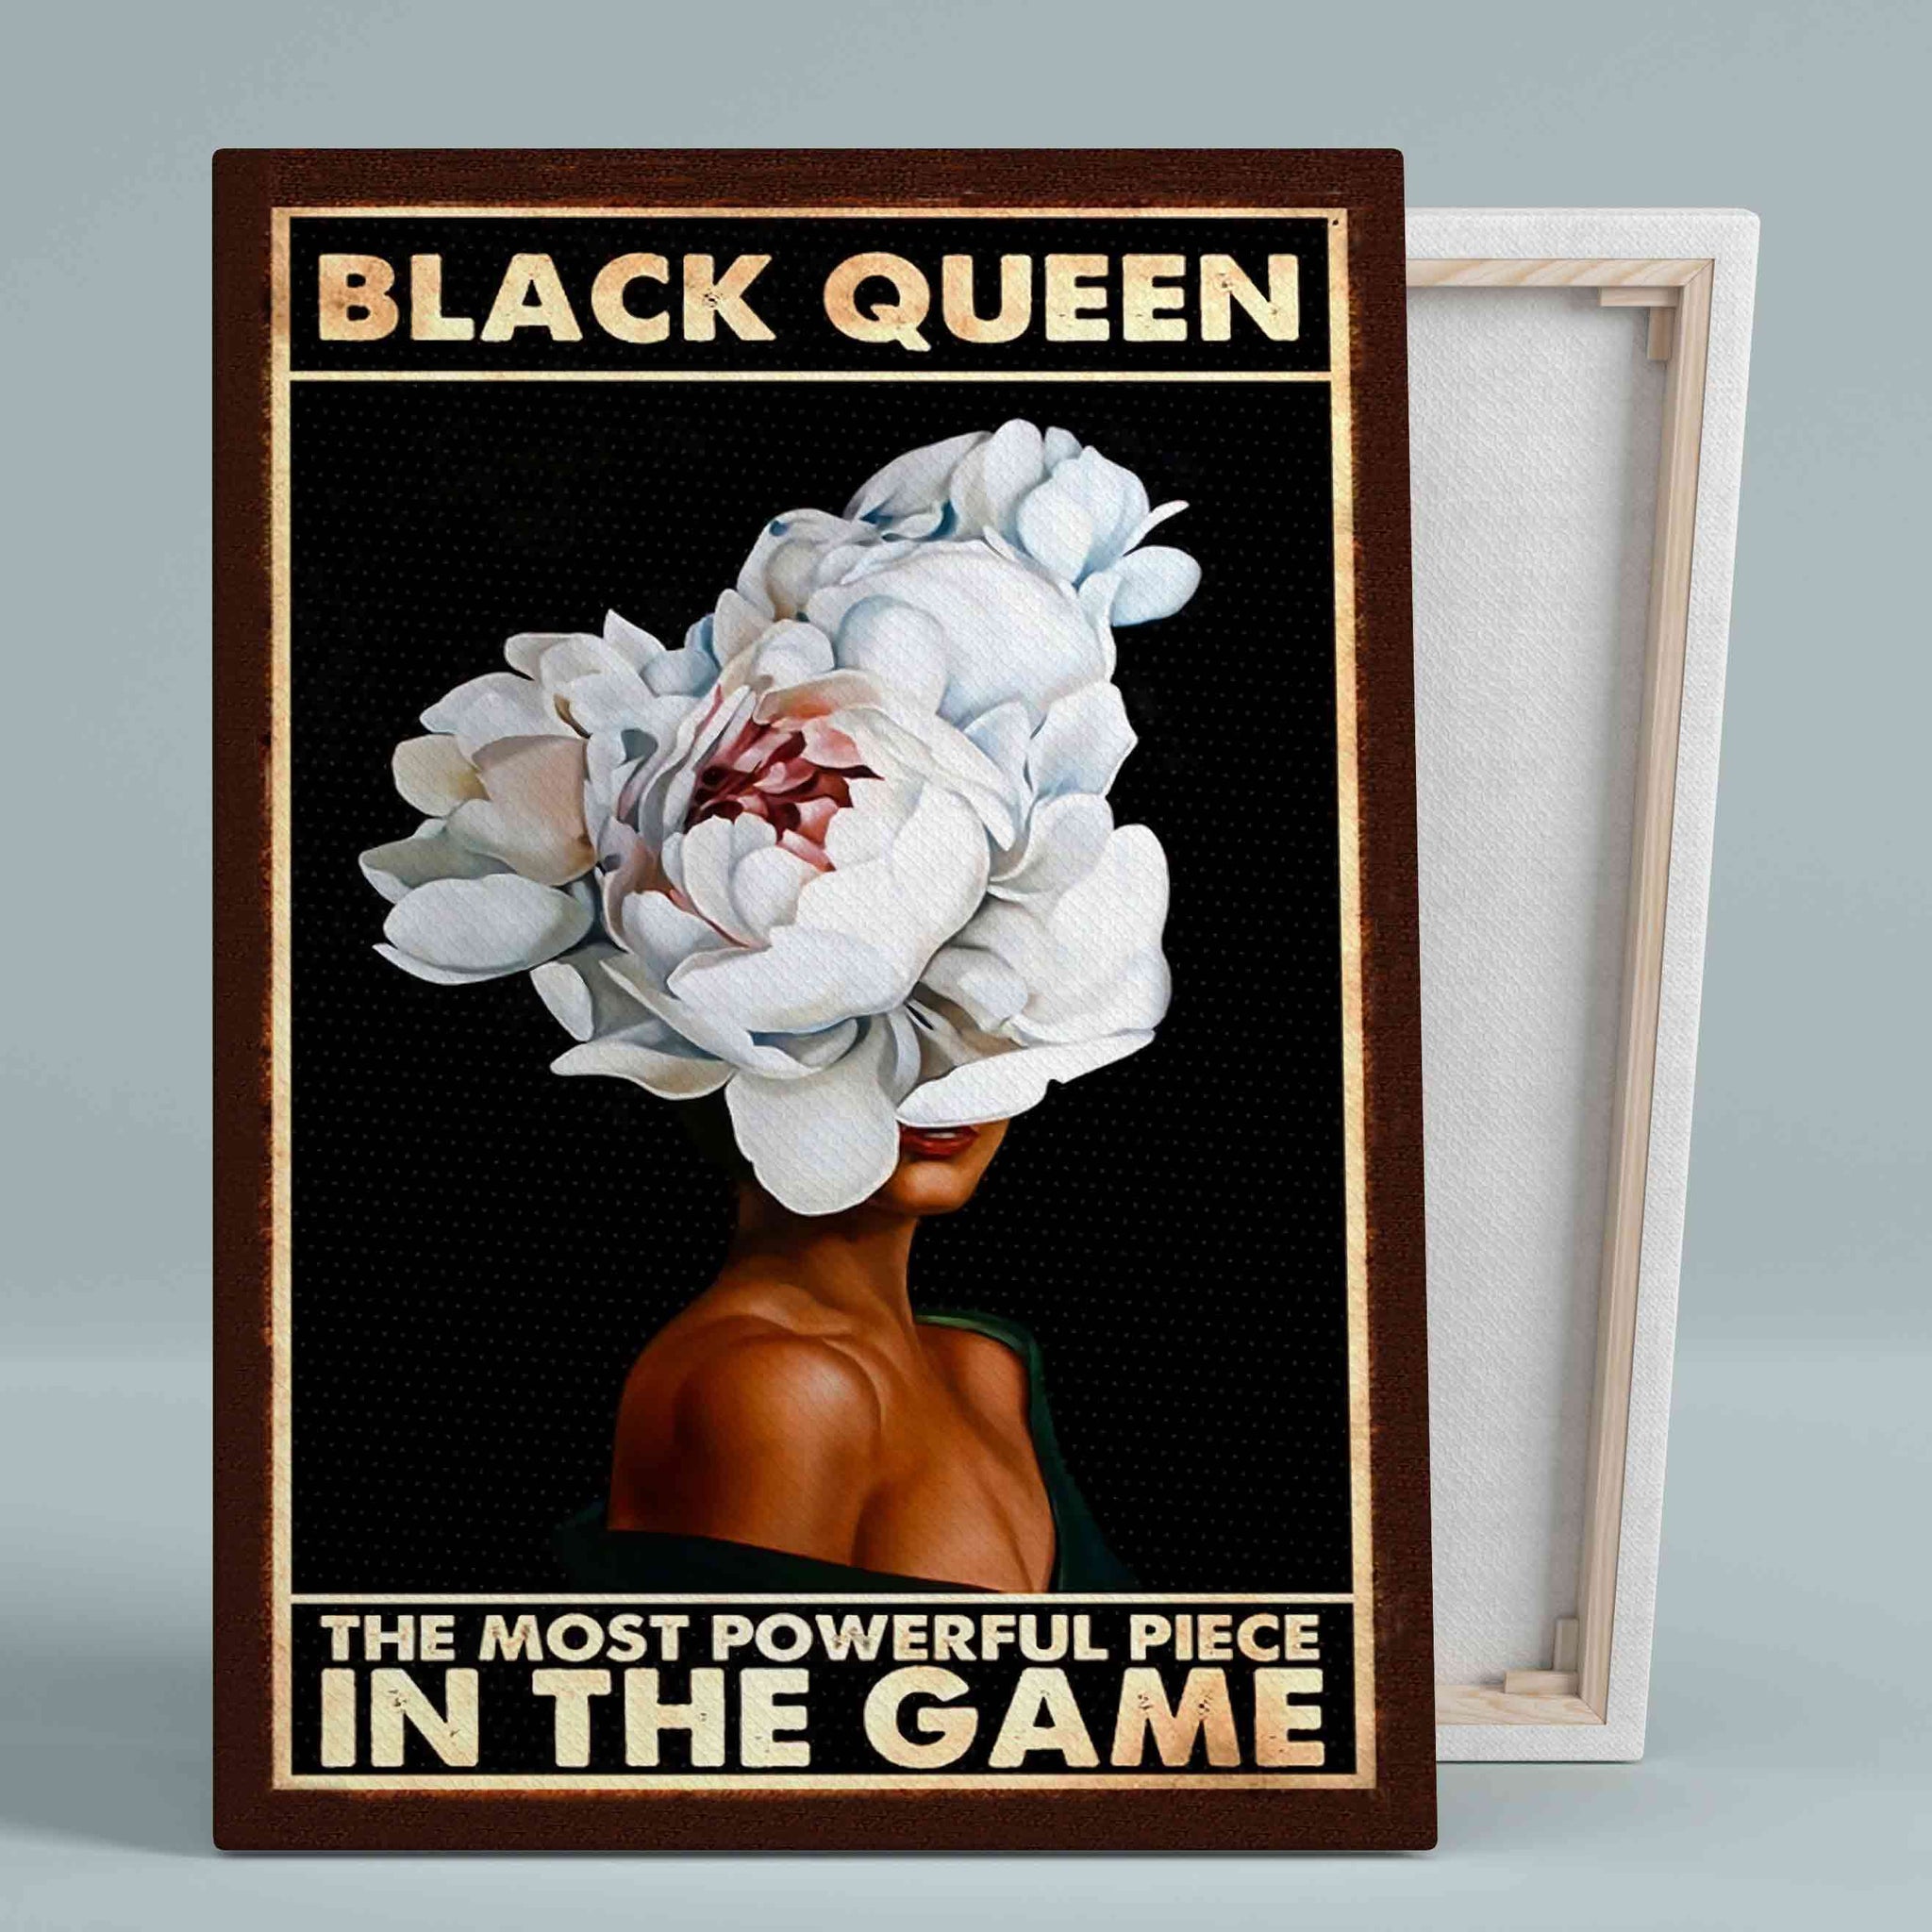 Black Queen The Most Powerful Piece In The Game Canvas, Black Queen Canvas, Black Woman Canvas